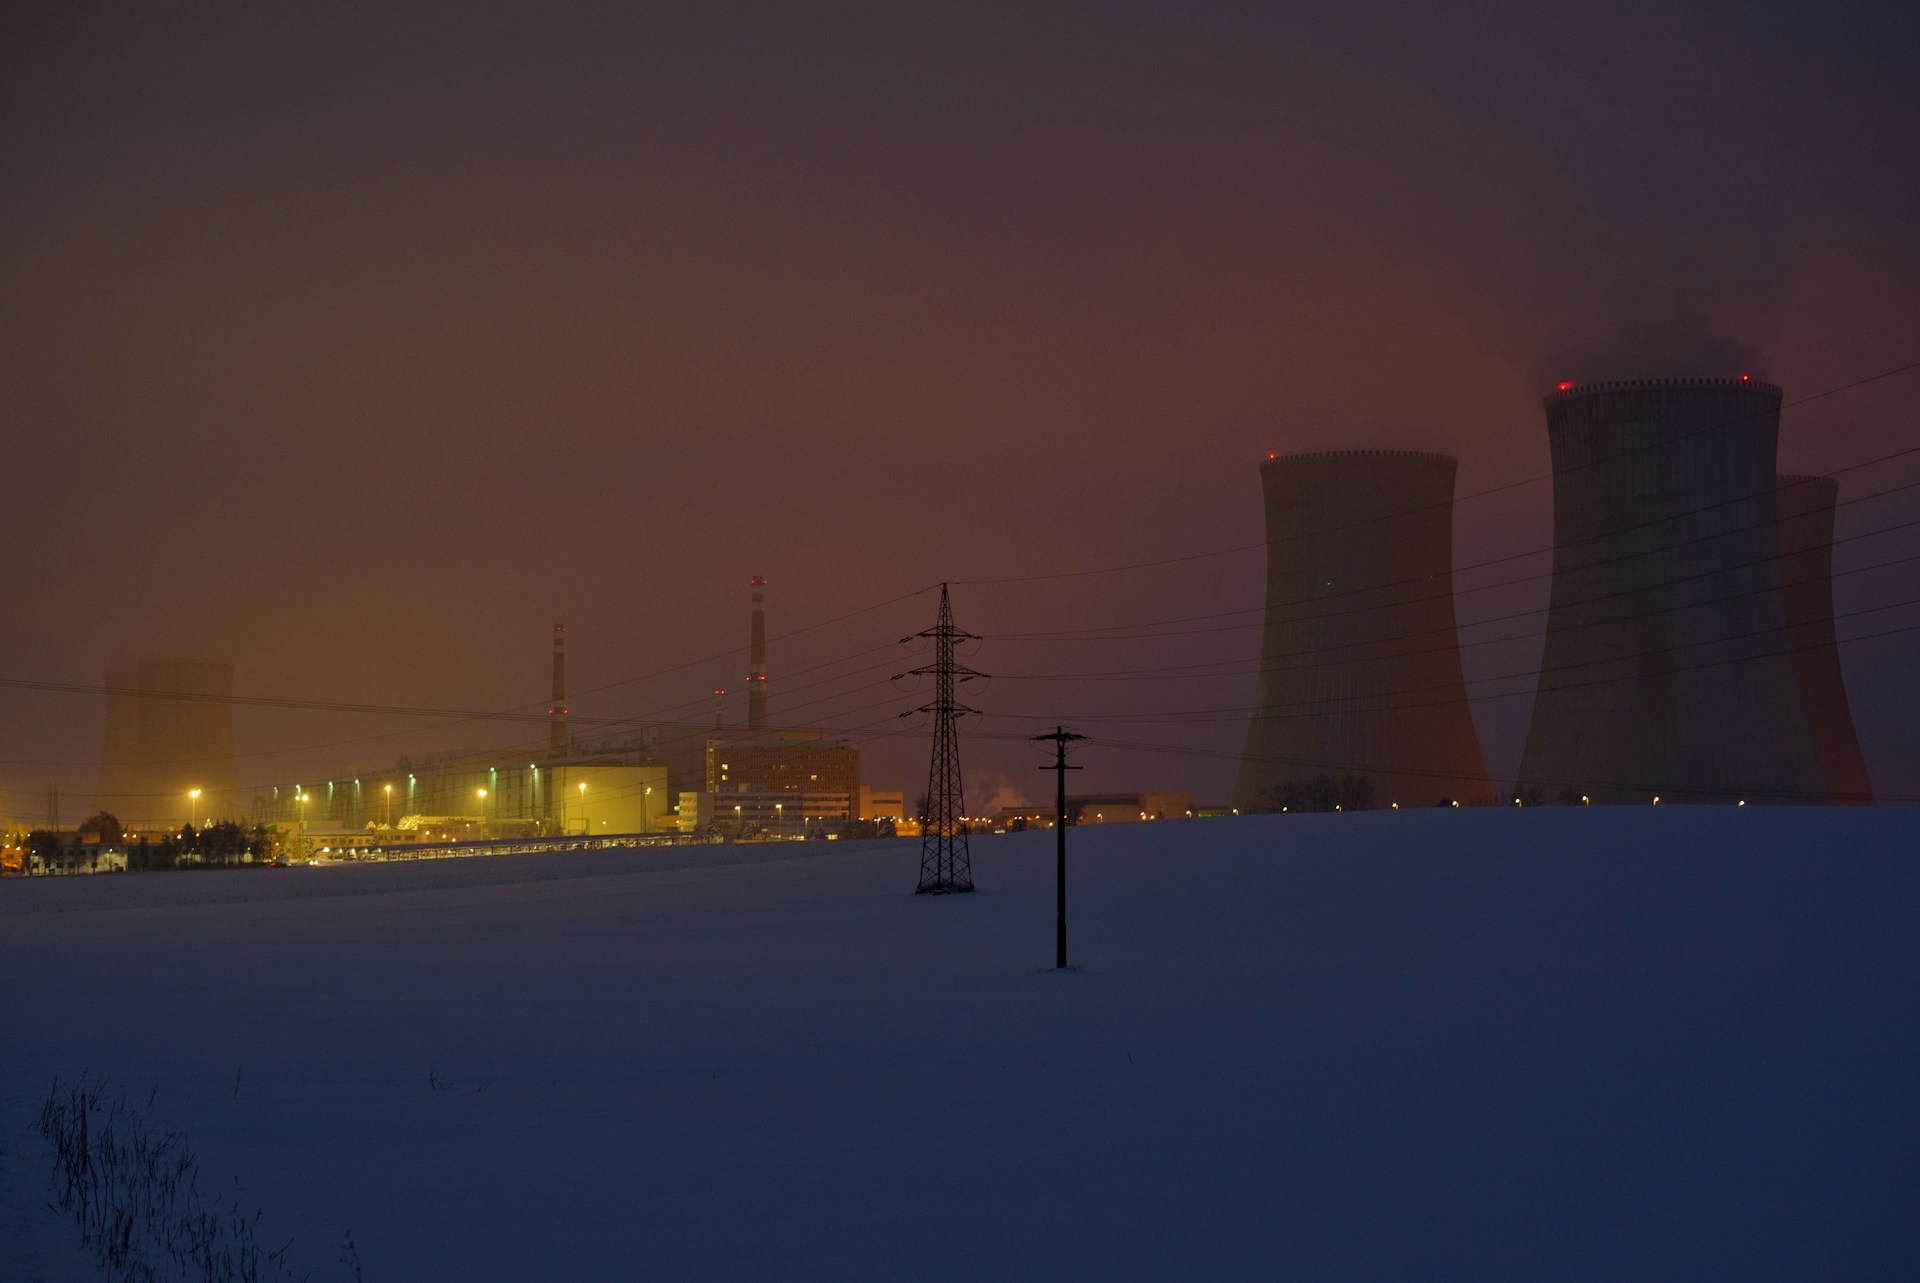 Global Nuclear Power Renaissance Runs Parallel to US-Russia Race for Geopolitical Influence